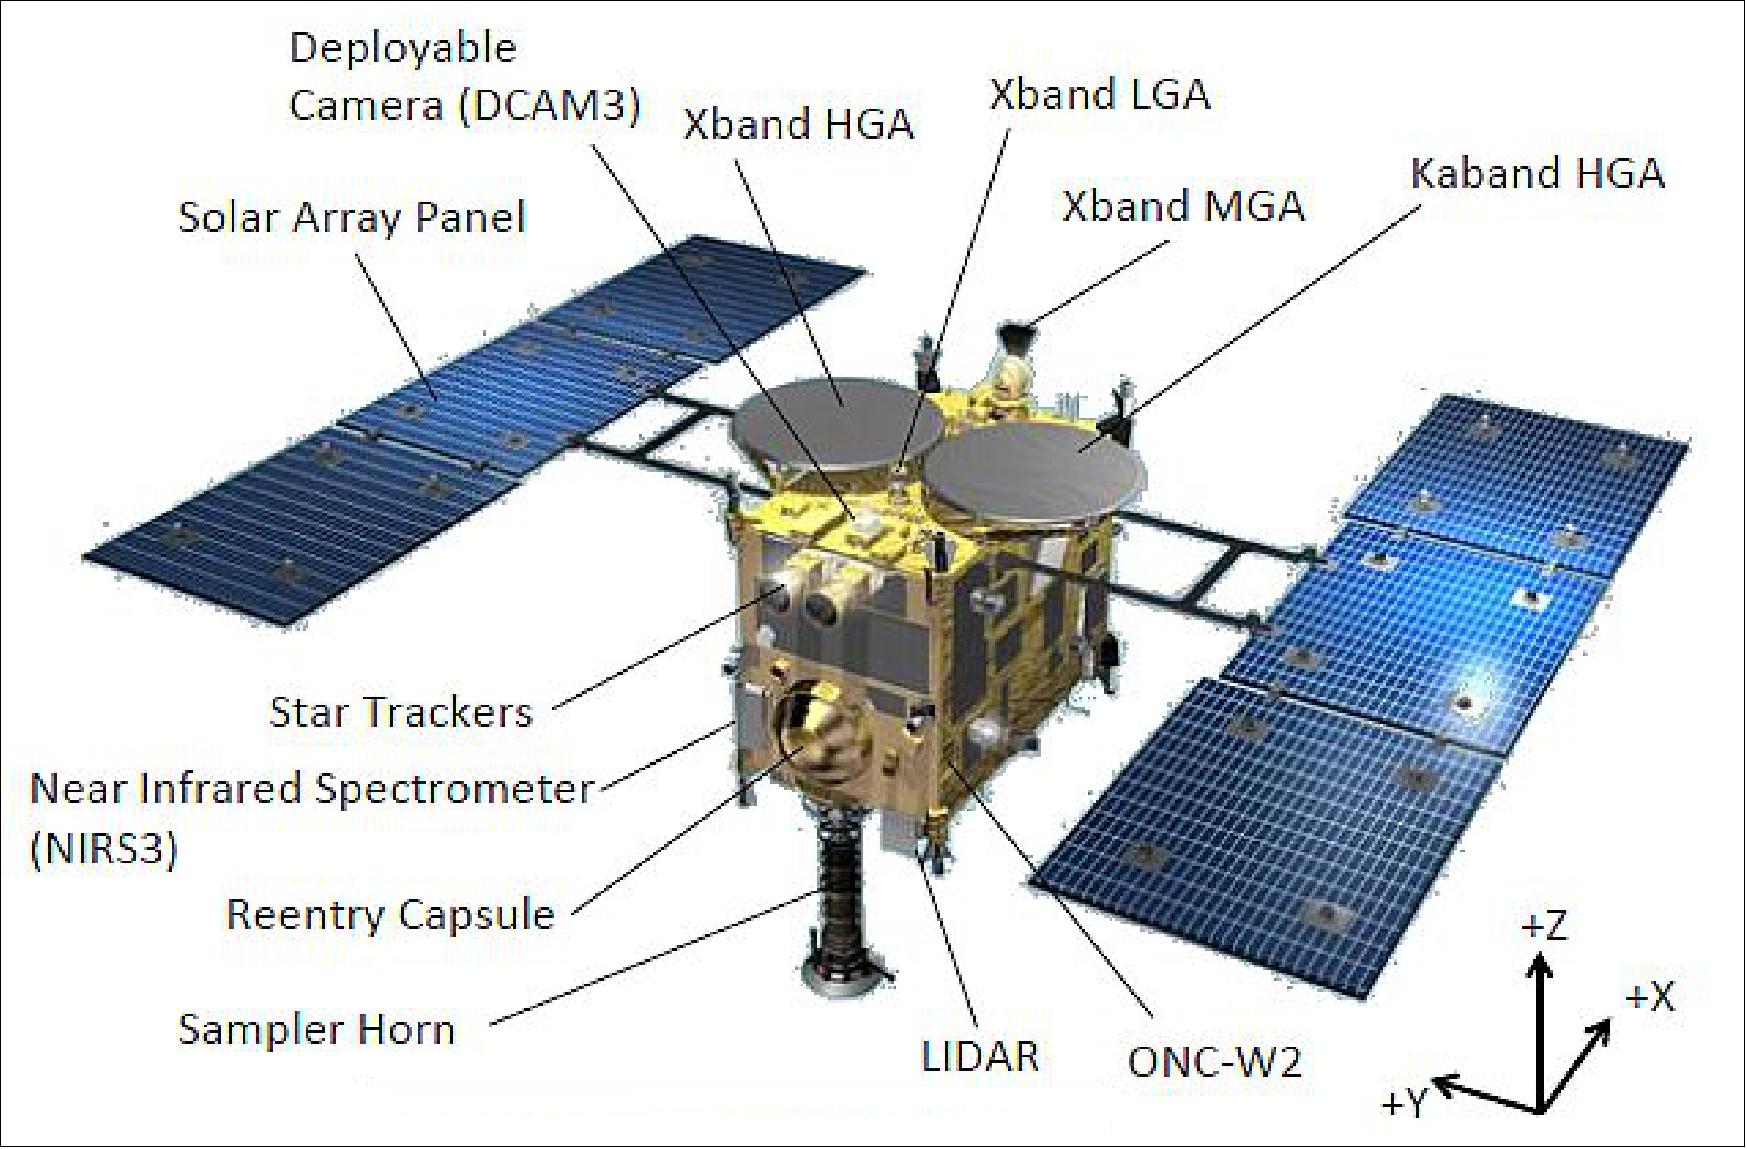 Figure 6: Top view of the deployed Hayabusa-2 spacecraft illustrating the various elements of the spacecraft (image credit: JAXA)